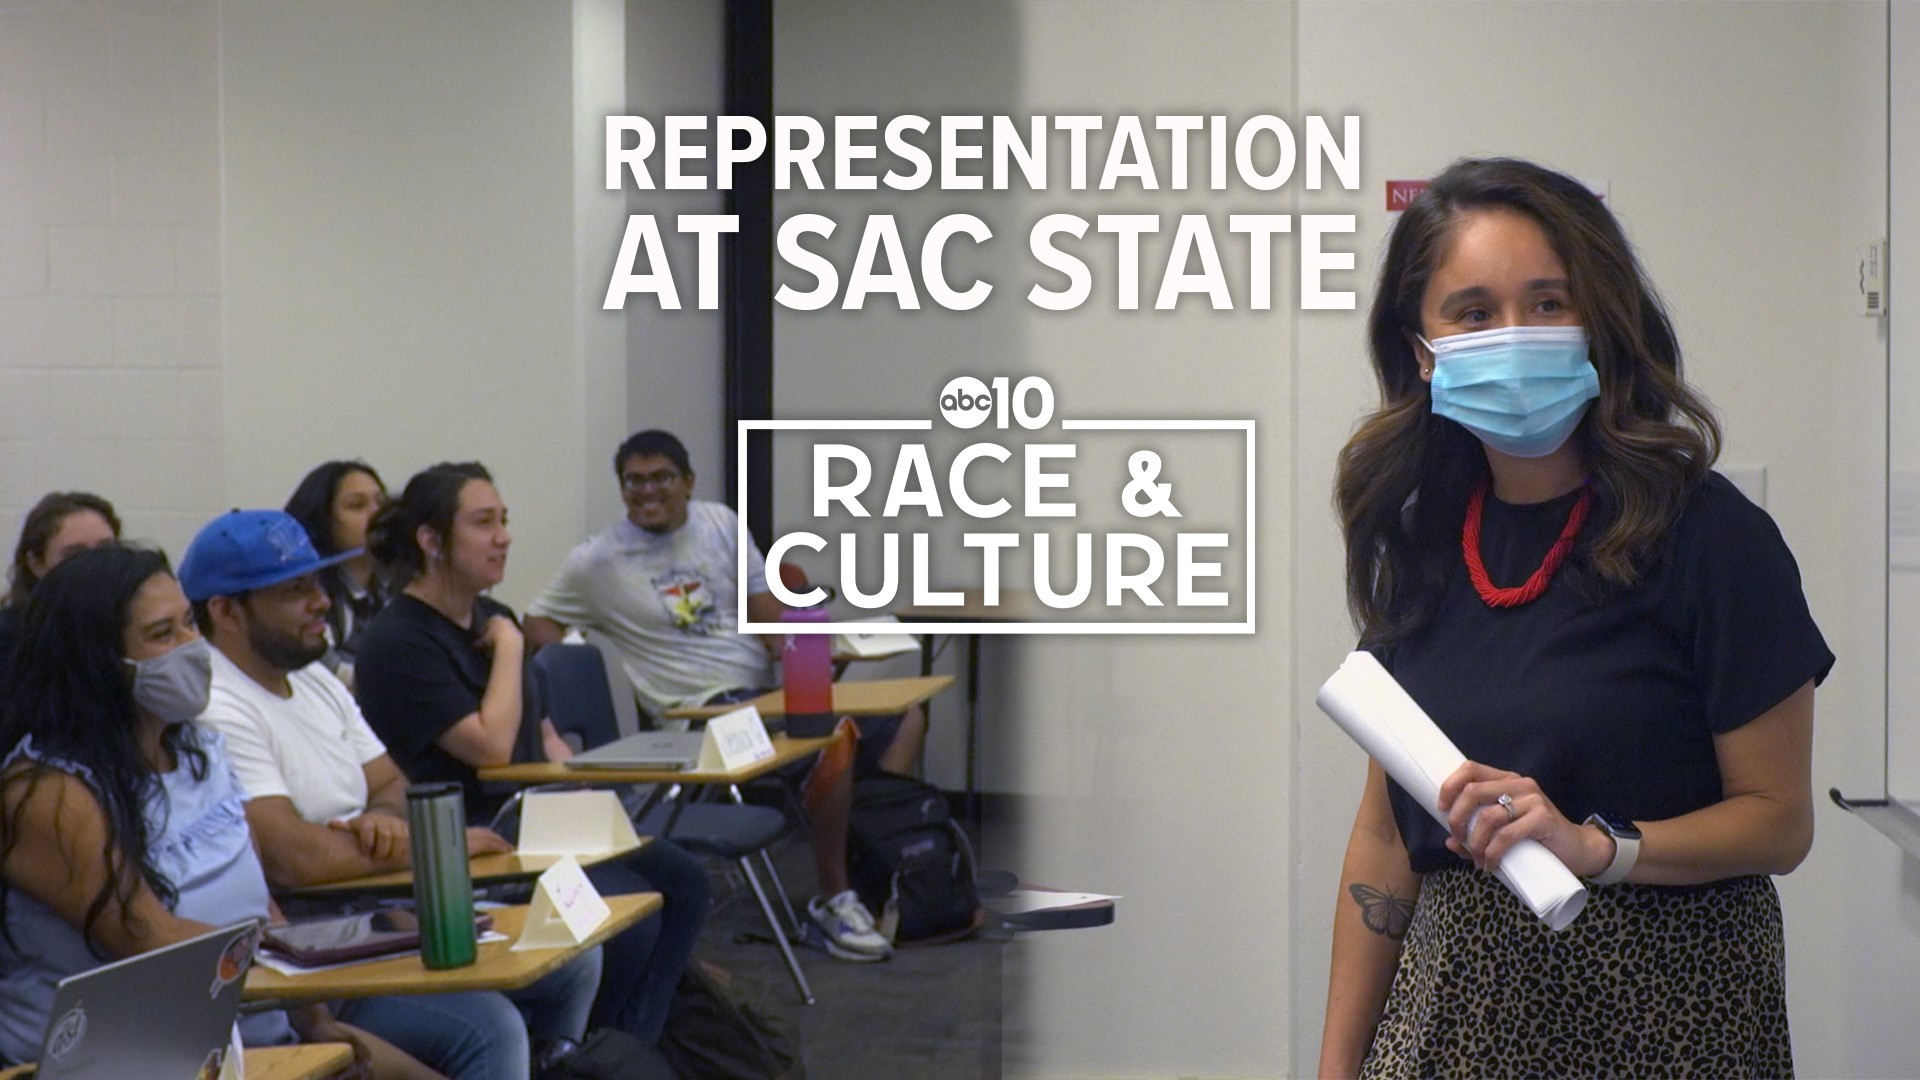 In fall 2021, Sac State had 1,098 white faculty compared to 152 Latino faculty. The university enrolled 11,327 Latino students.